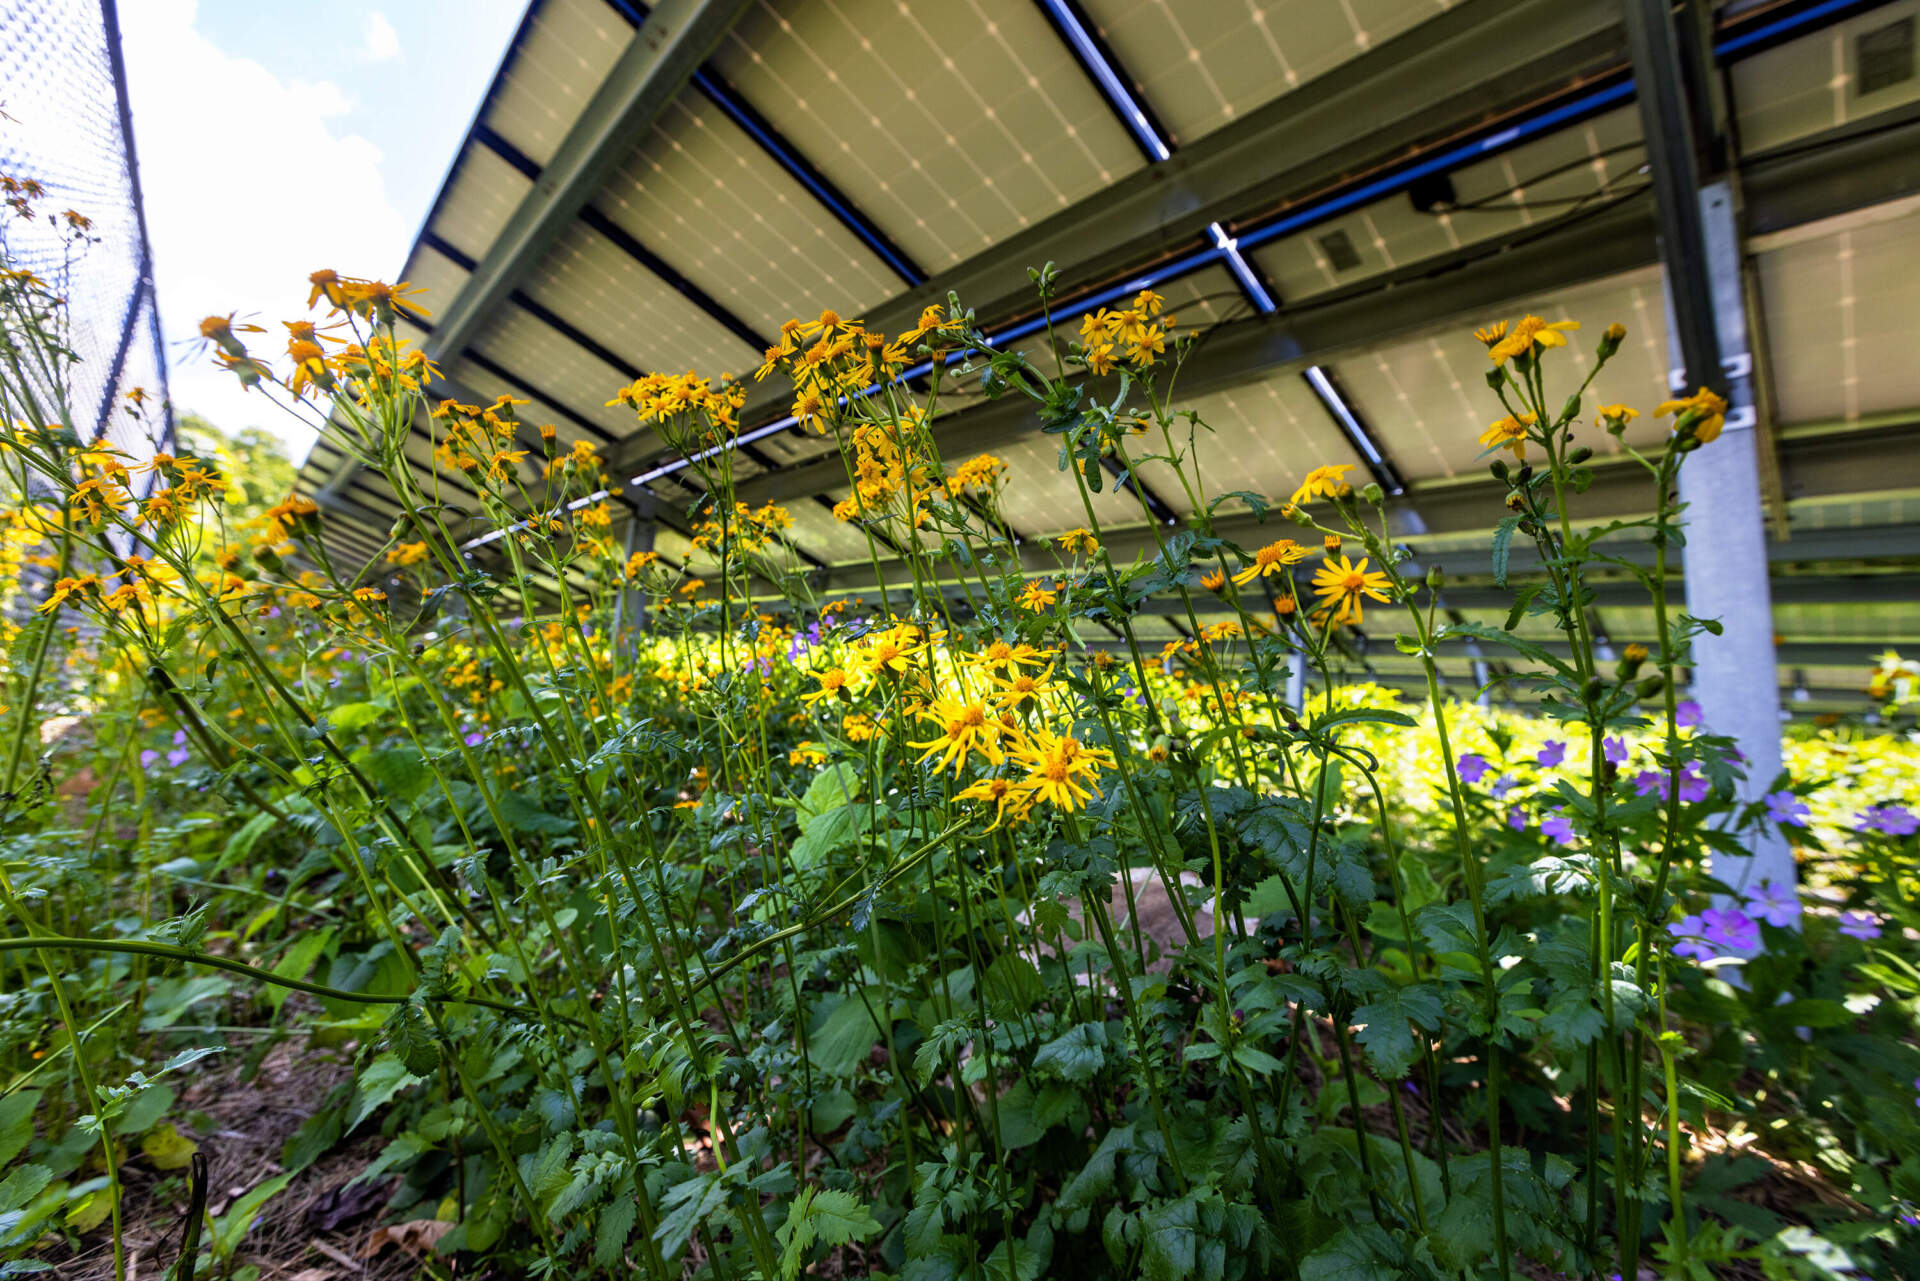 Wildflowers growing beneath the solar arrays in the pollinator meadow at the Weld Research Building of the Arnold Arboretum. (Jesse Costa/WBUR)